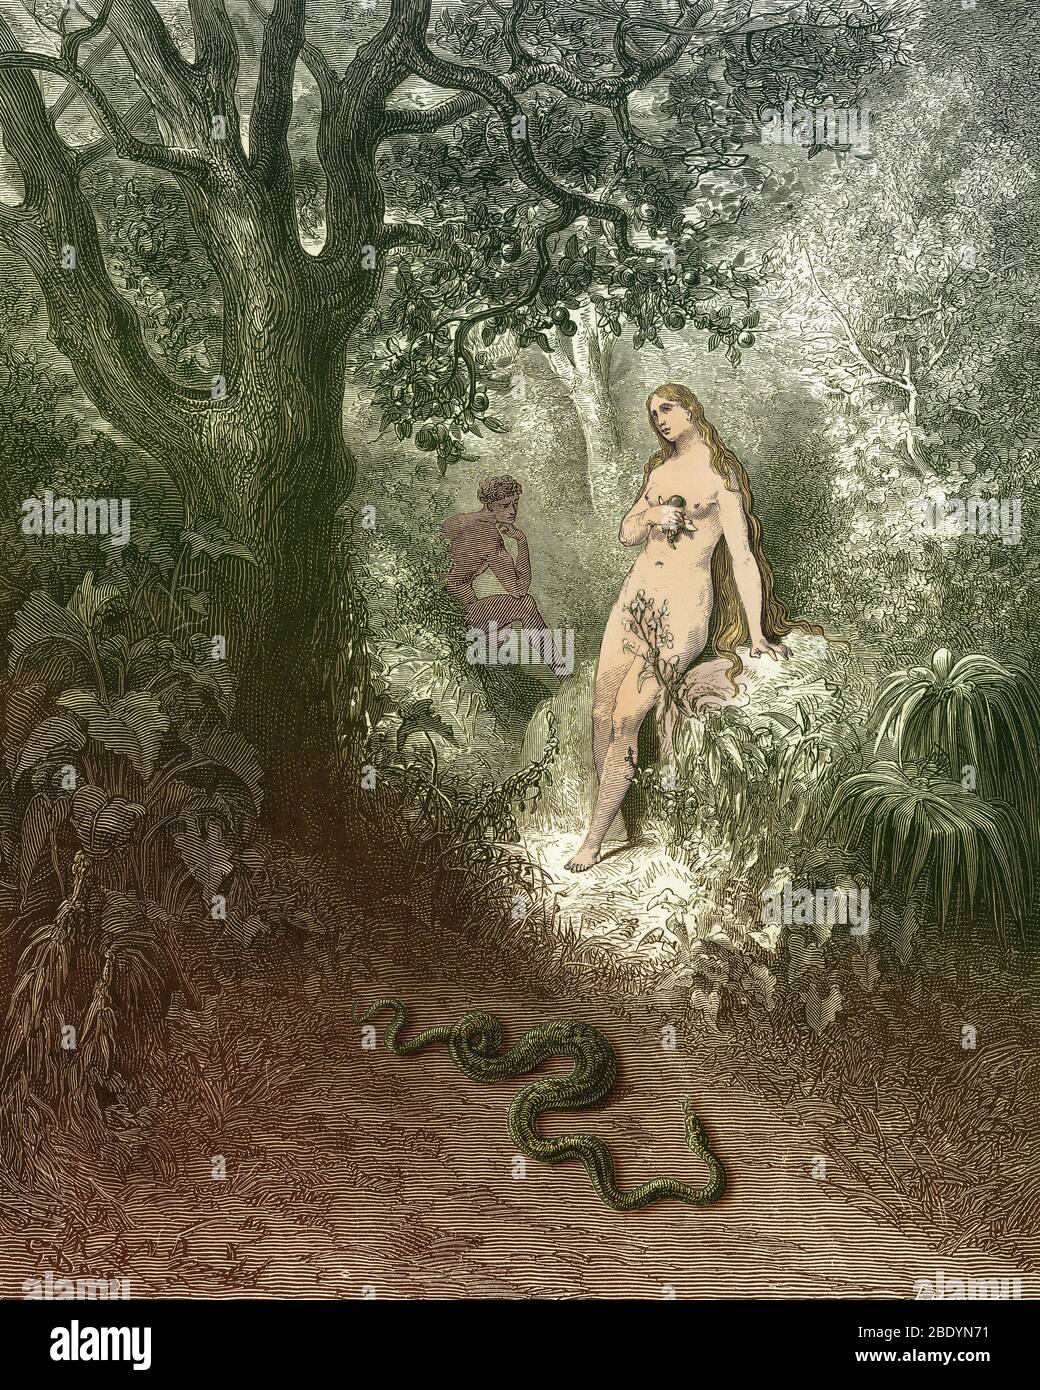 Adam and Eve and Snake by Dore Stock Photo